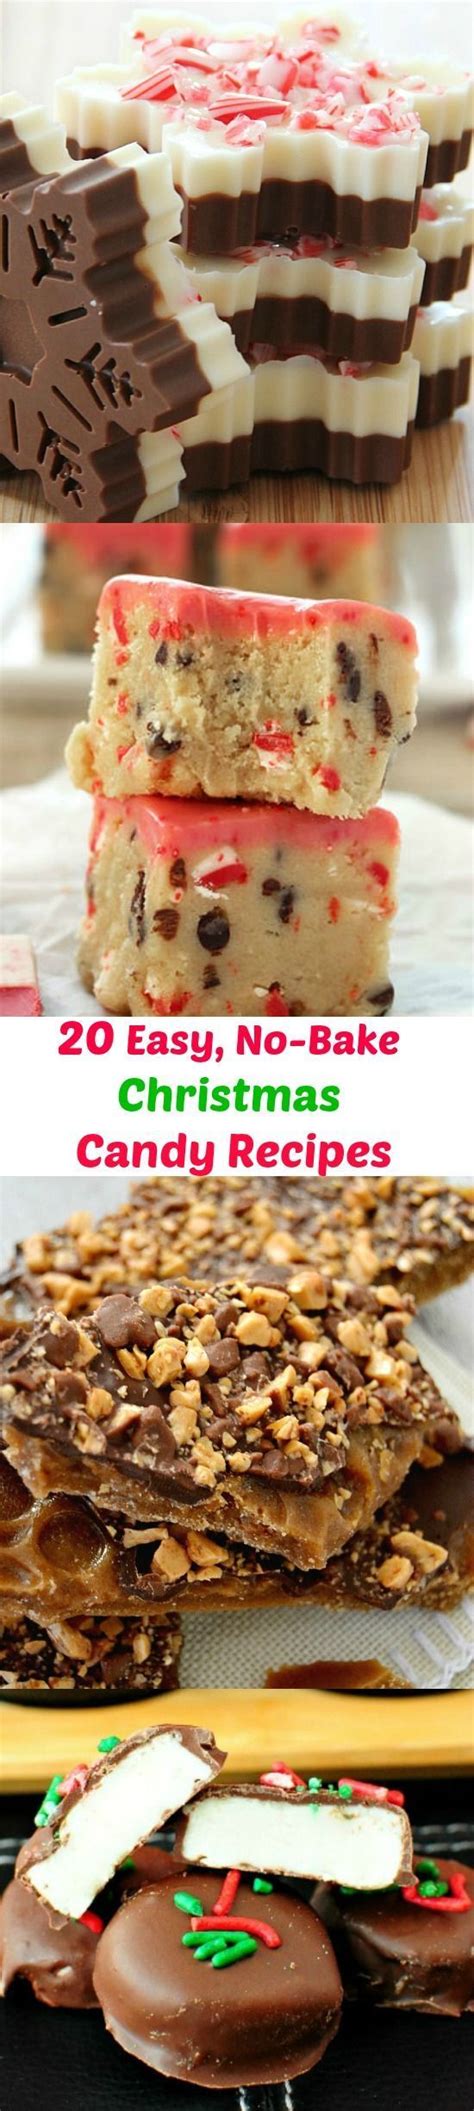 Fudge, peanut brittle, caramels, whatever you fancy! 20 Easy No-Bake Christmas Candy Recipes | Easy christmas ...